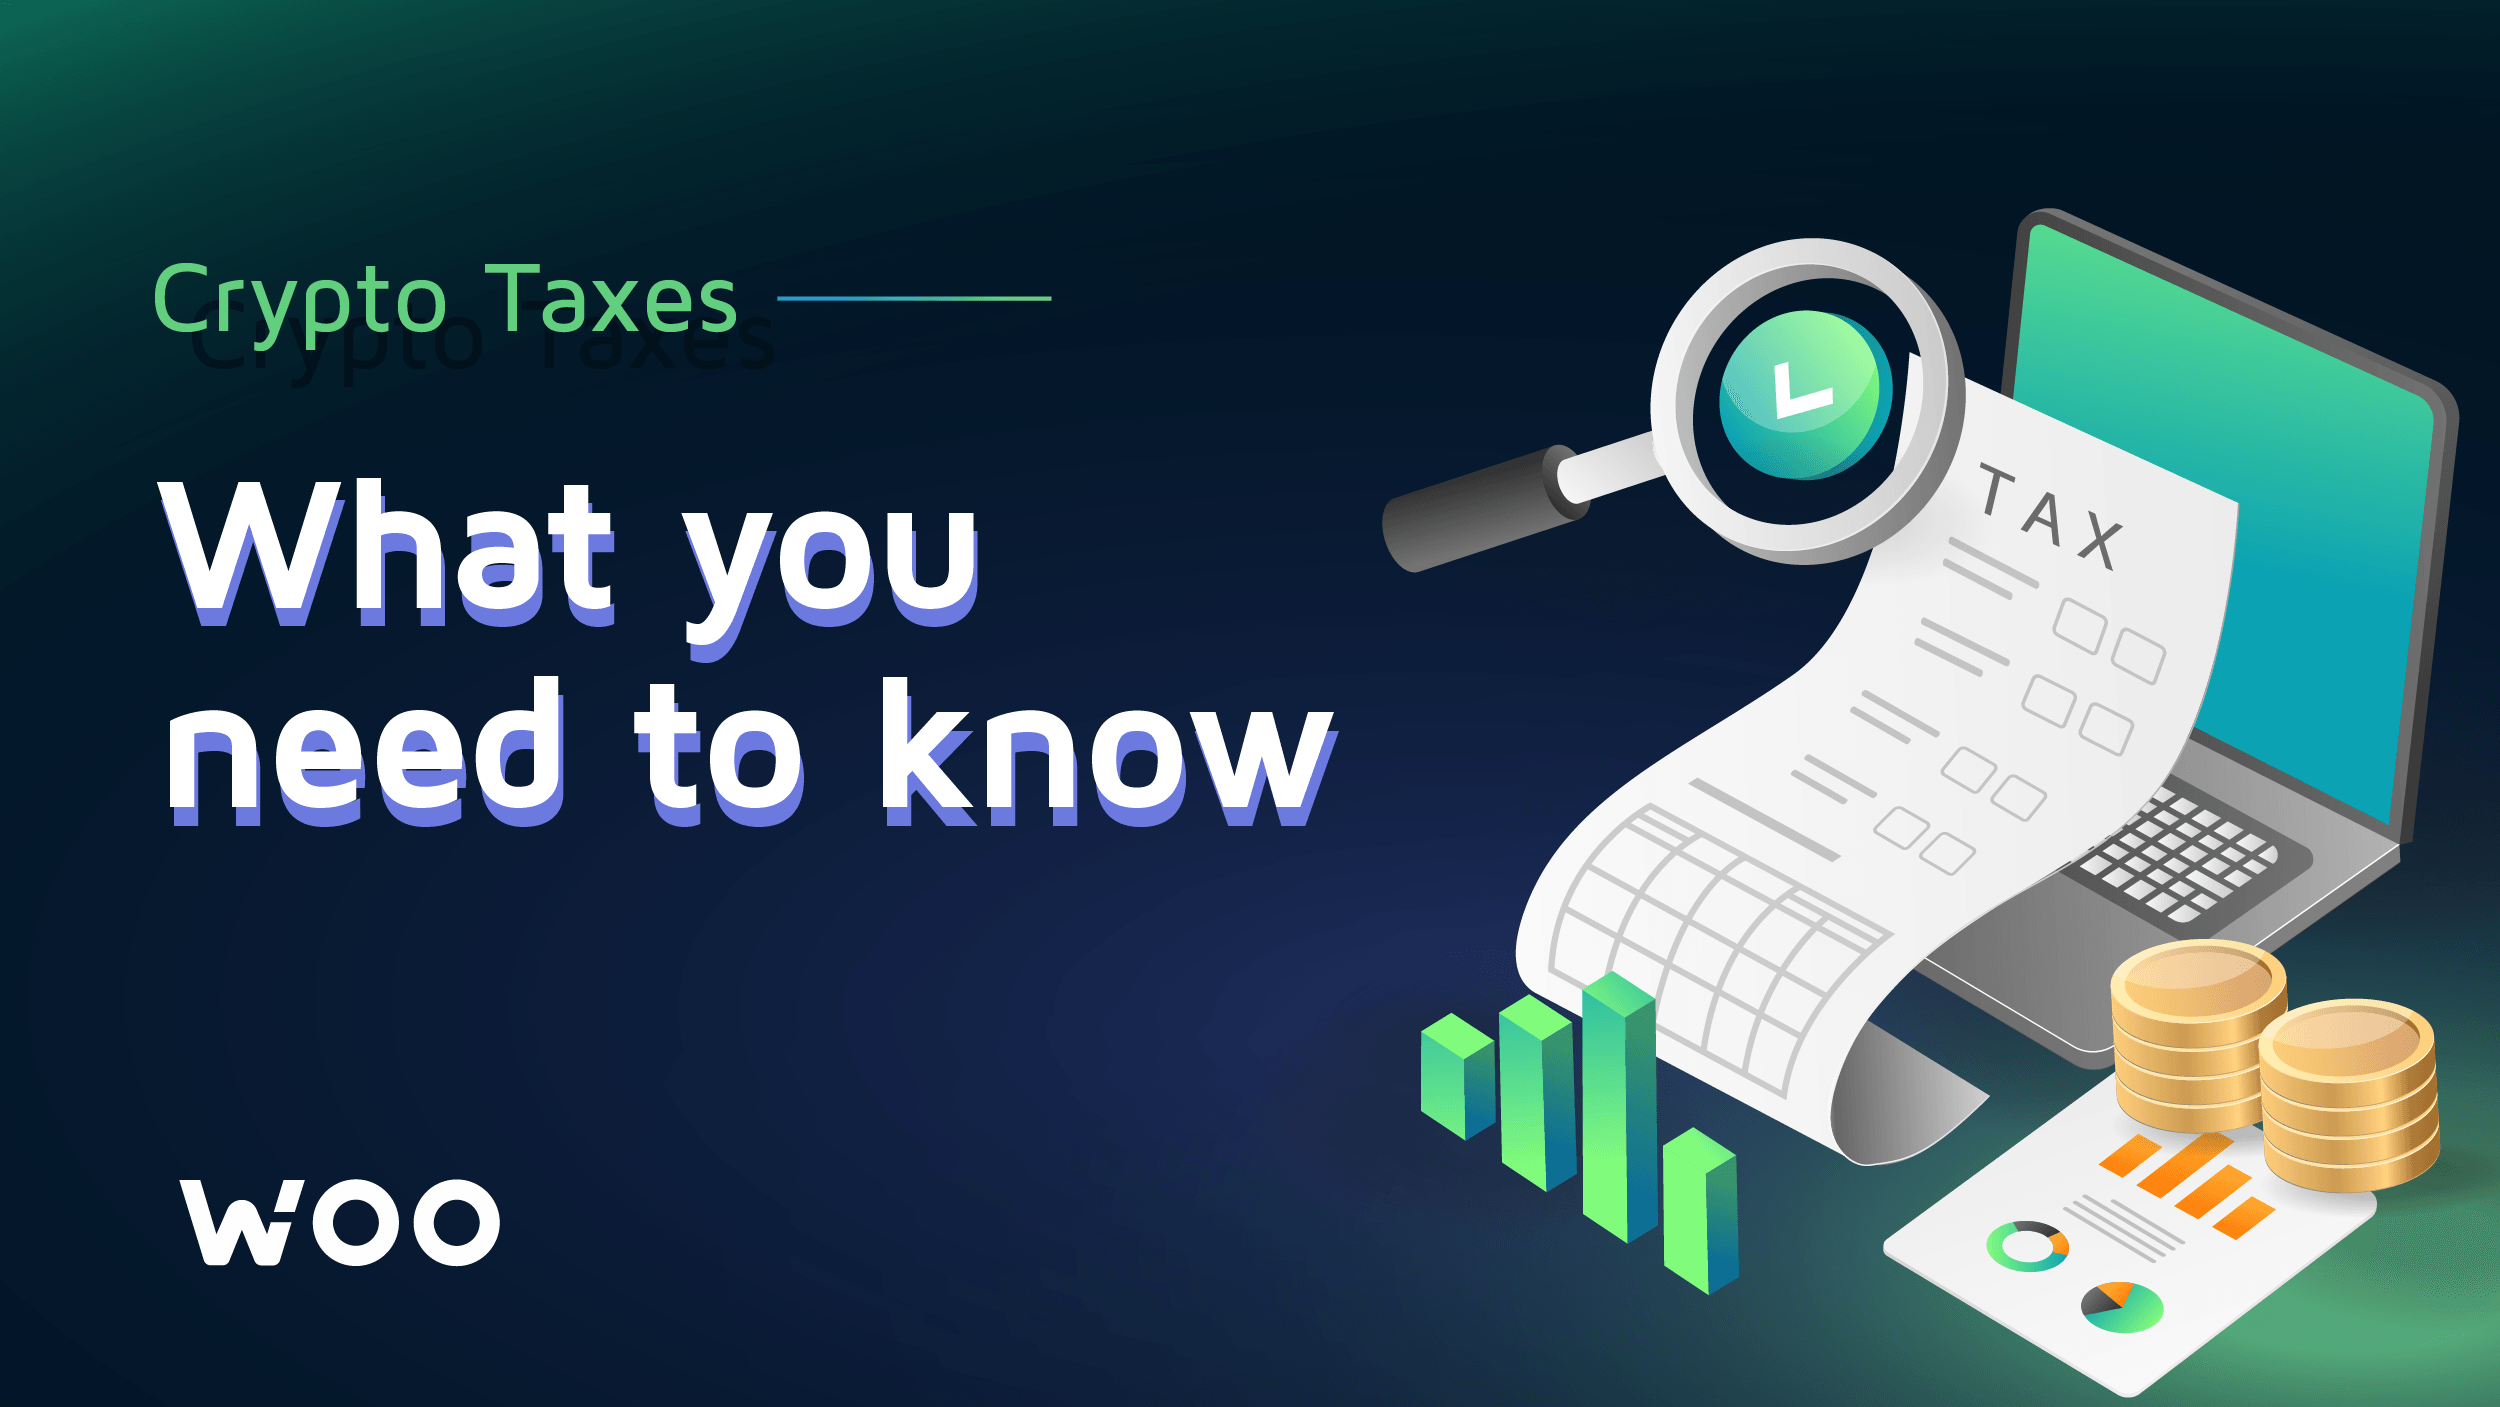 Crypto Taxes: What you need to know